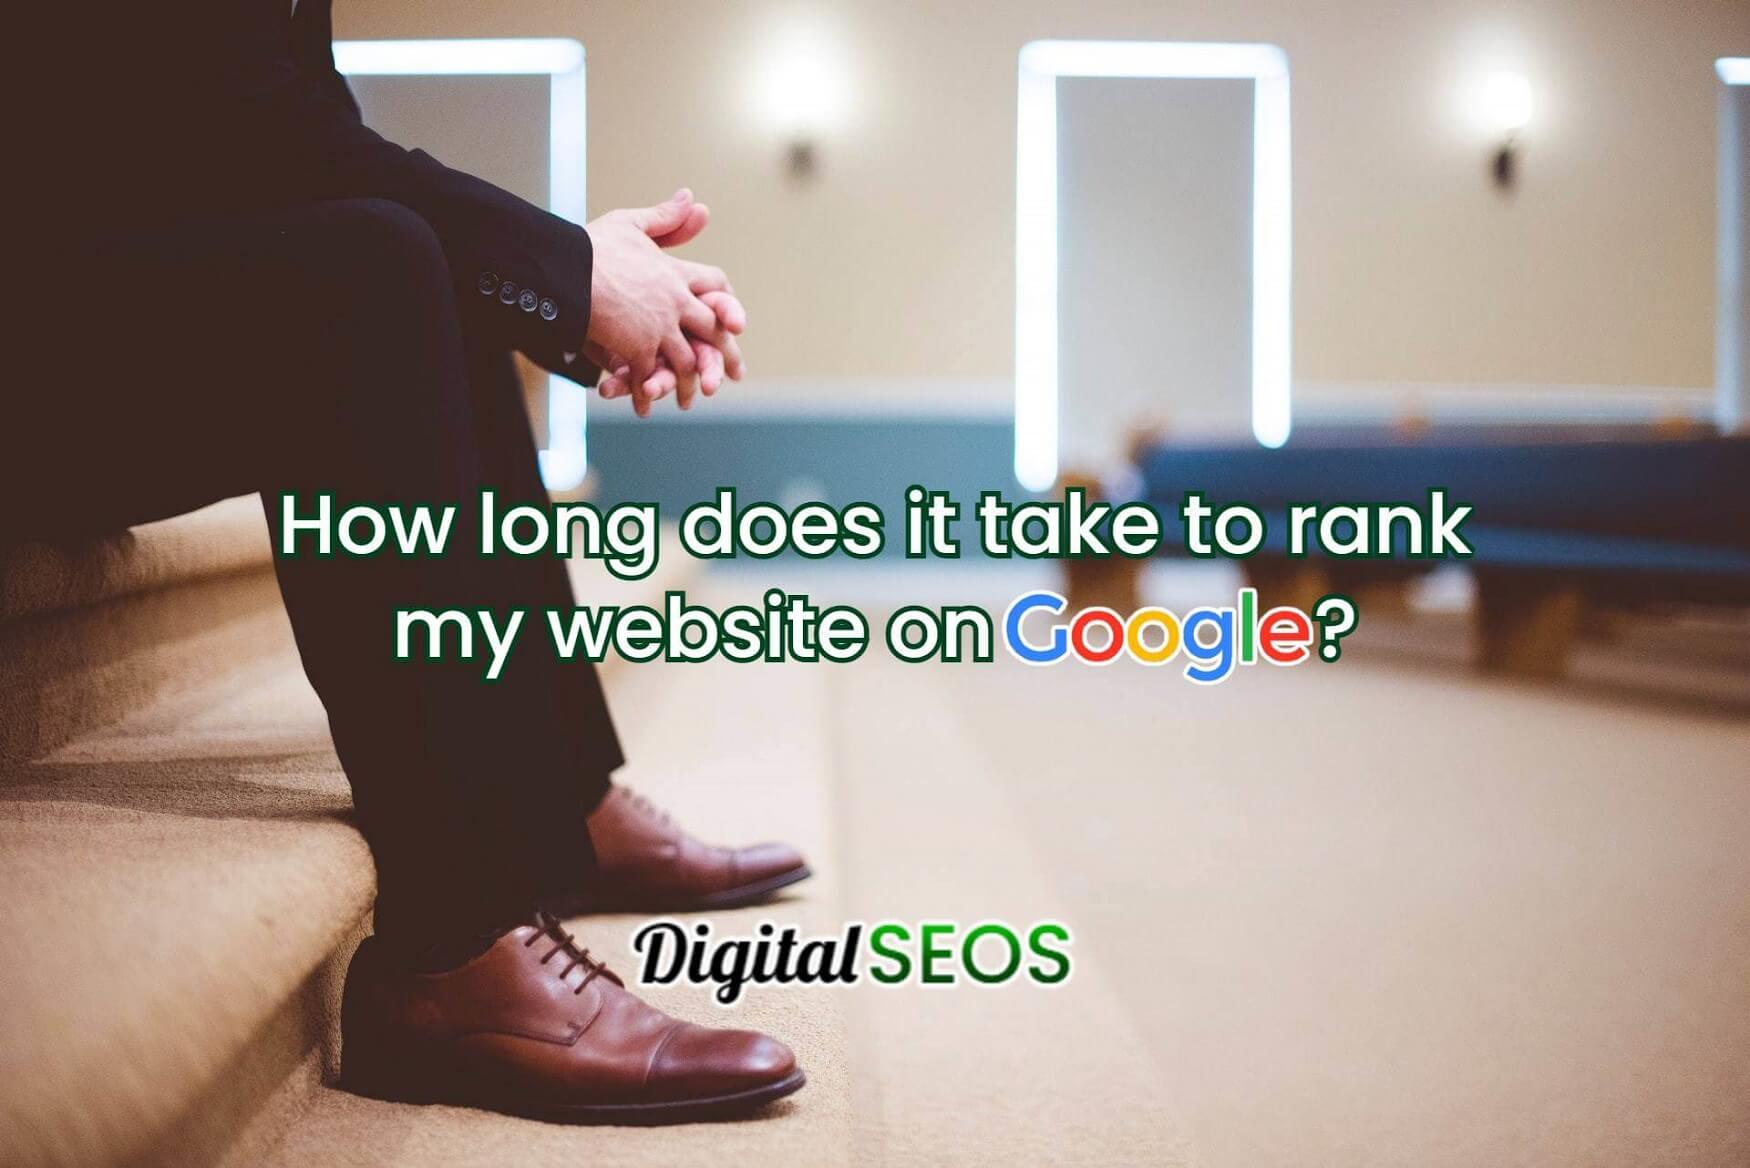 How long does it take to rank my website on Google?